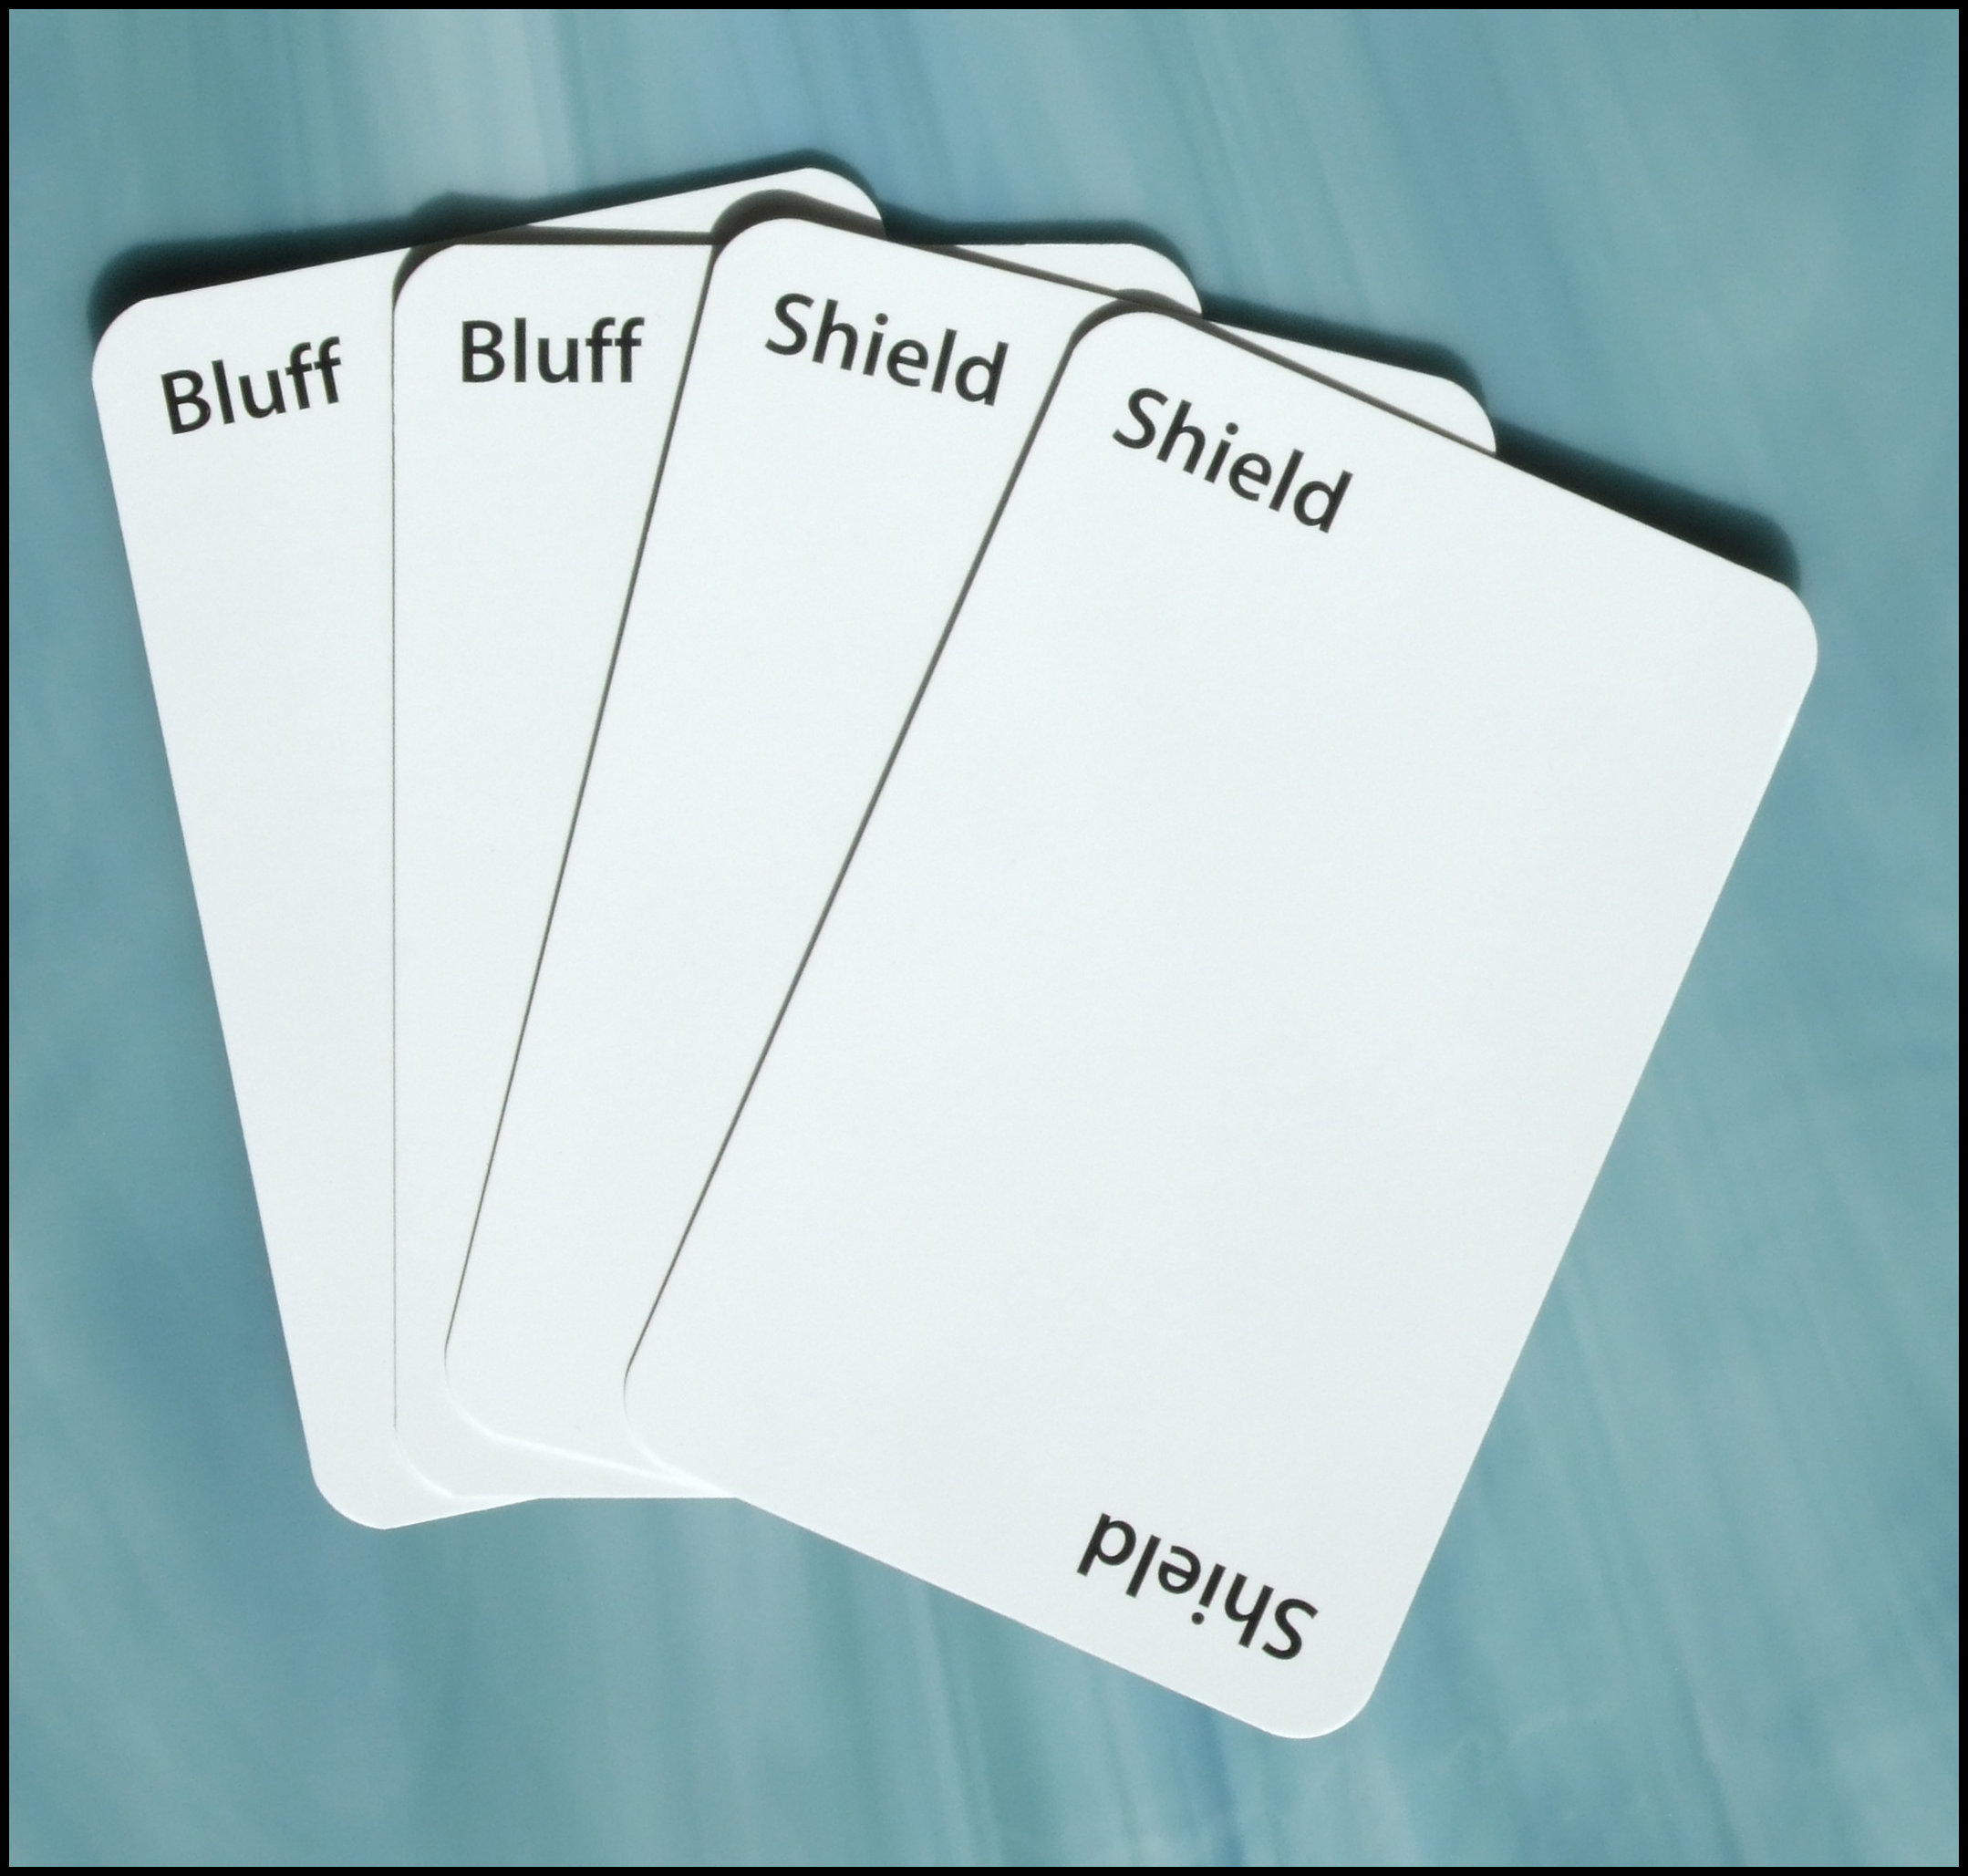 Termination Incorporated - Bluff And Shield Cards